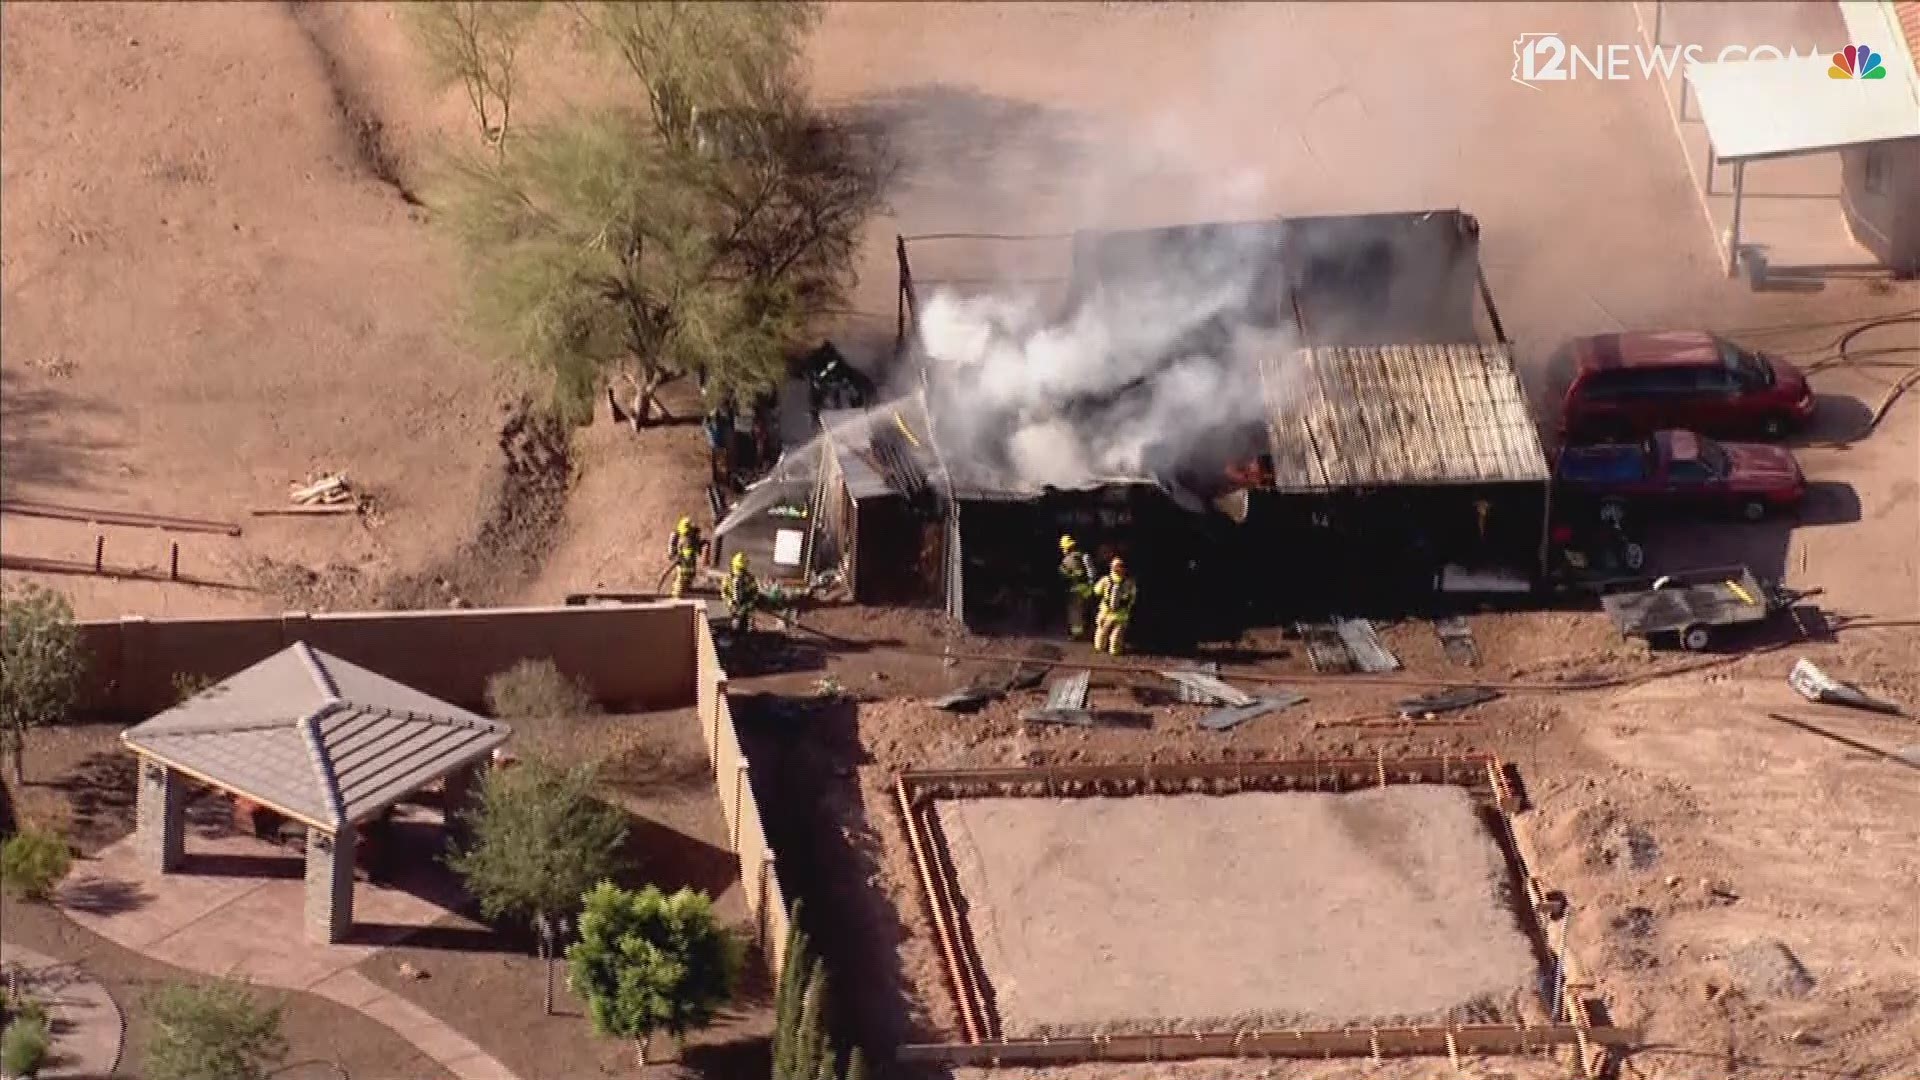 House fire on 107 Street in Mesa